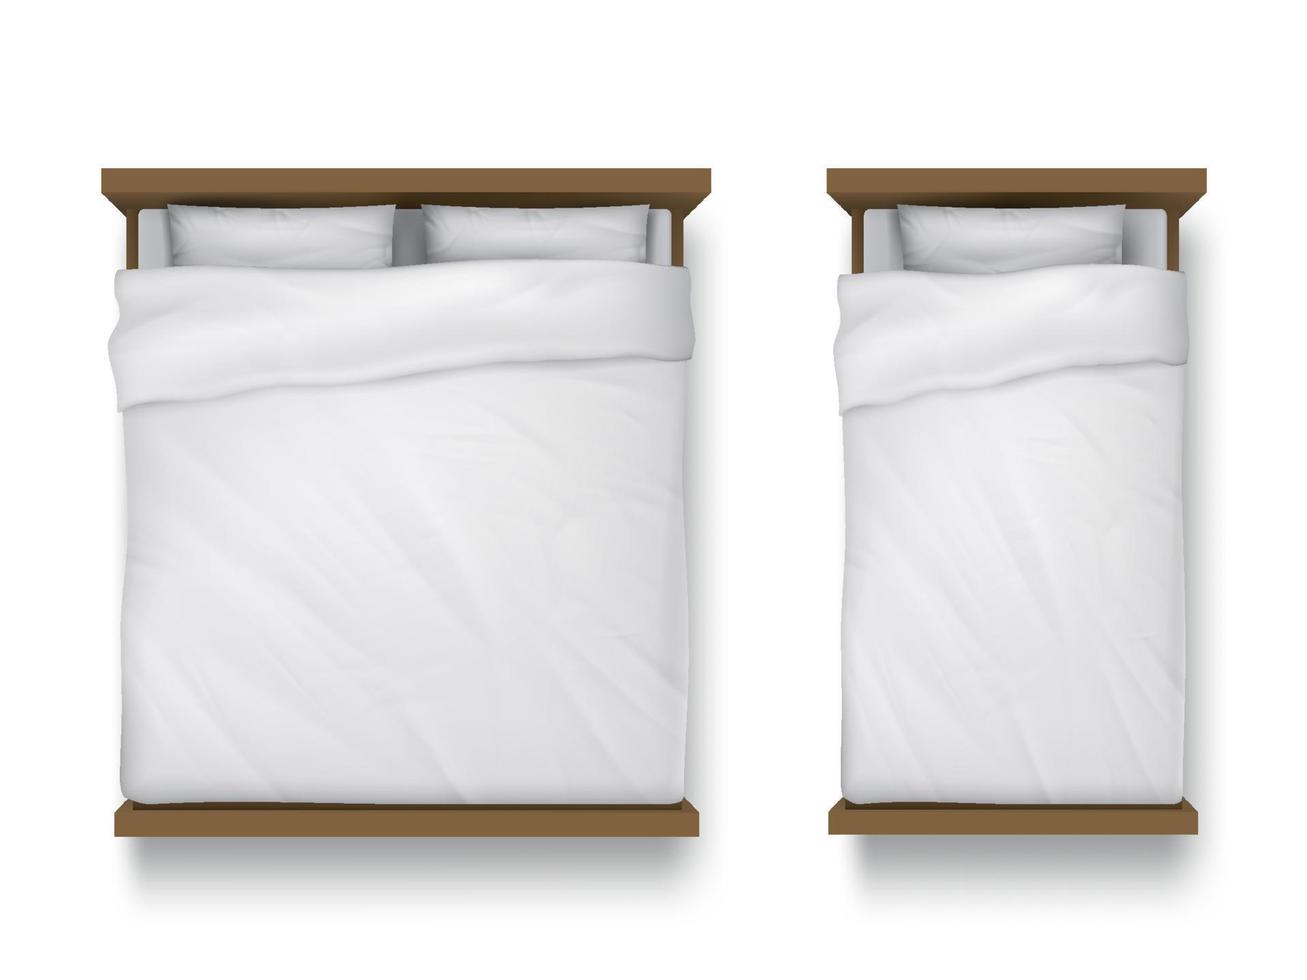 Single and double beds with white sheet linen vector